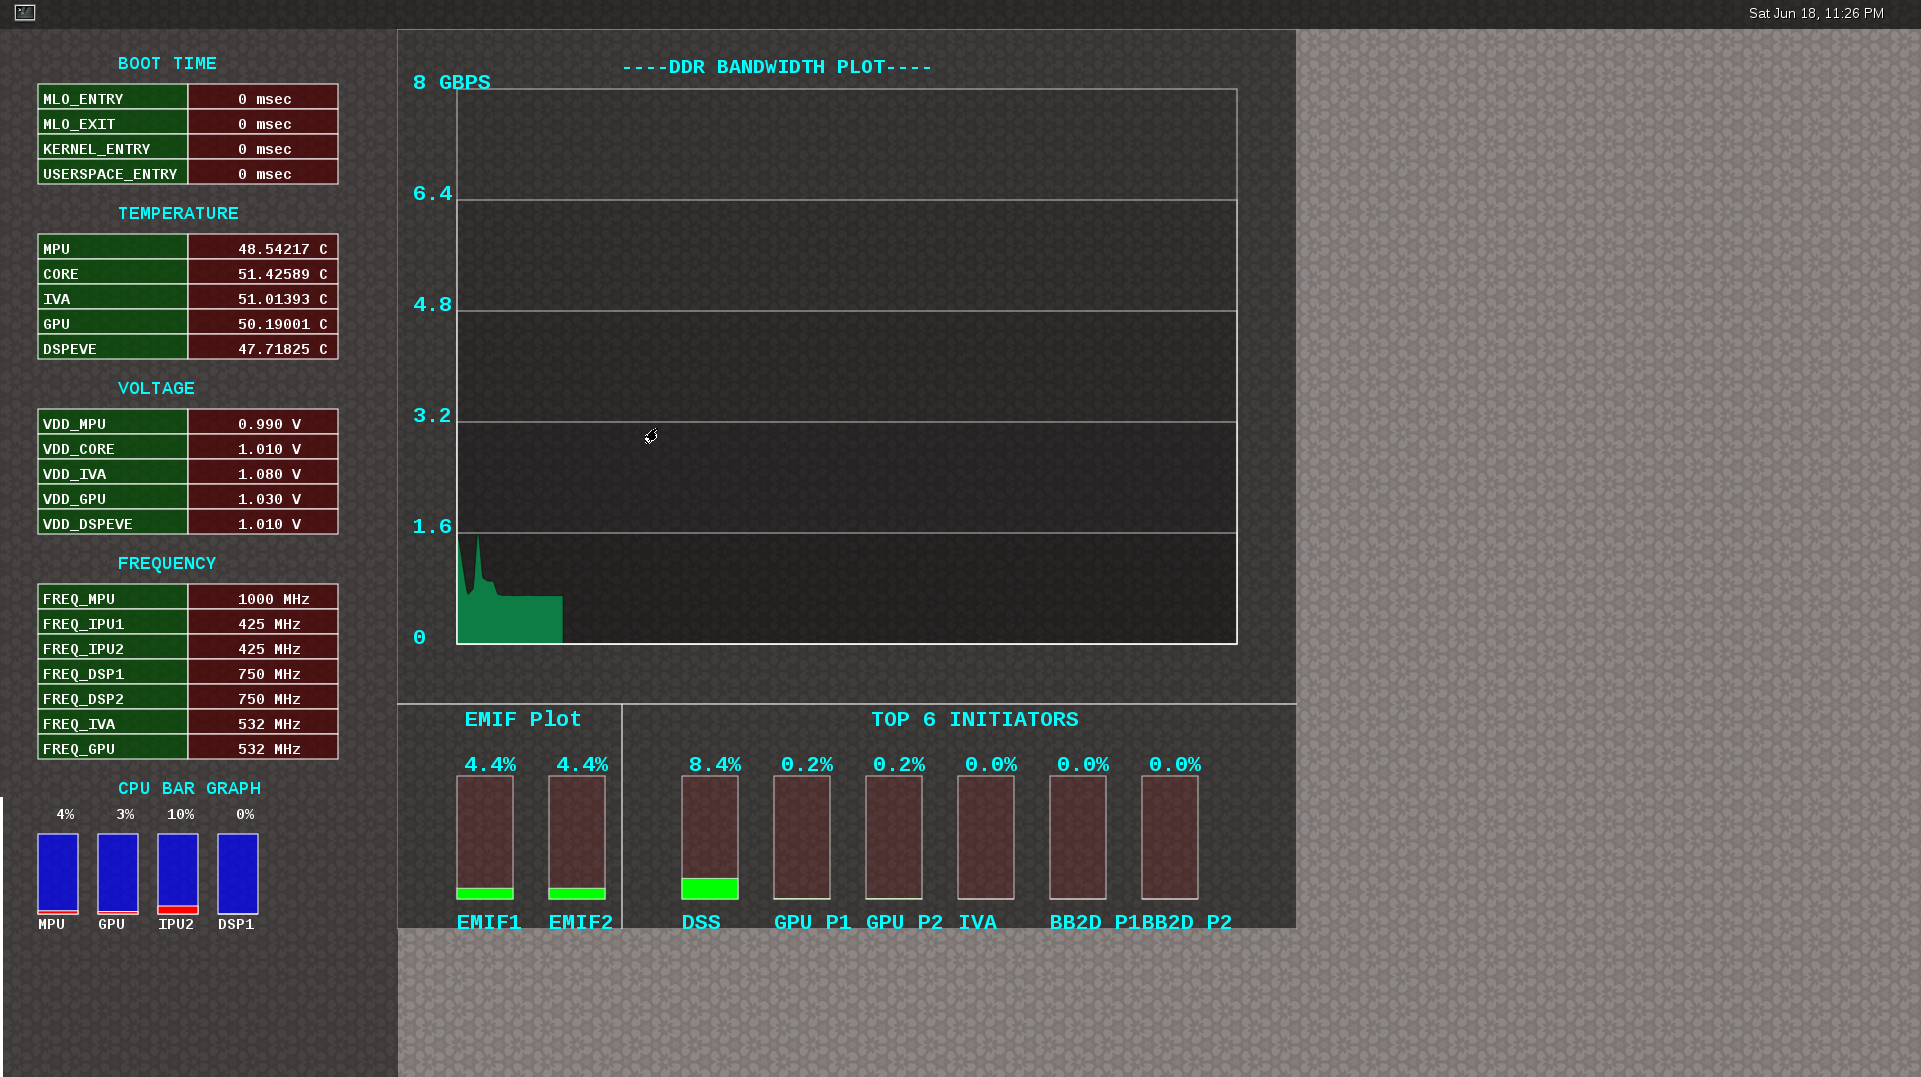 ../../../_images/Updated_screen_shot_of_soc_performance_monitoring_tools.png